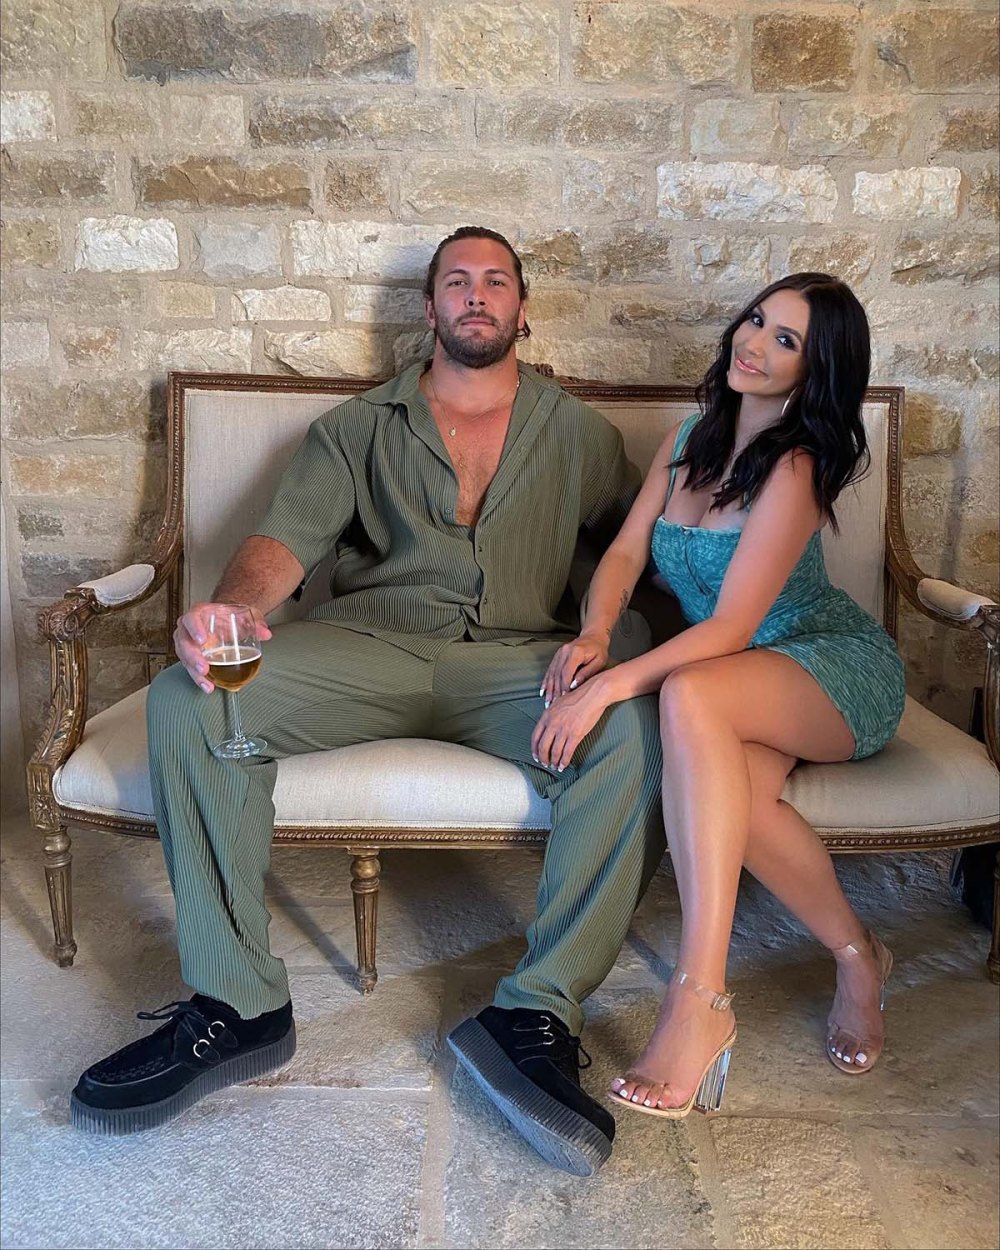 Scheana Shay Doesnt Need Anyones Approval Her Relationship With Brock